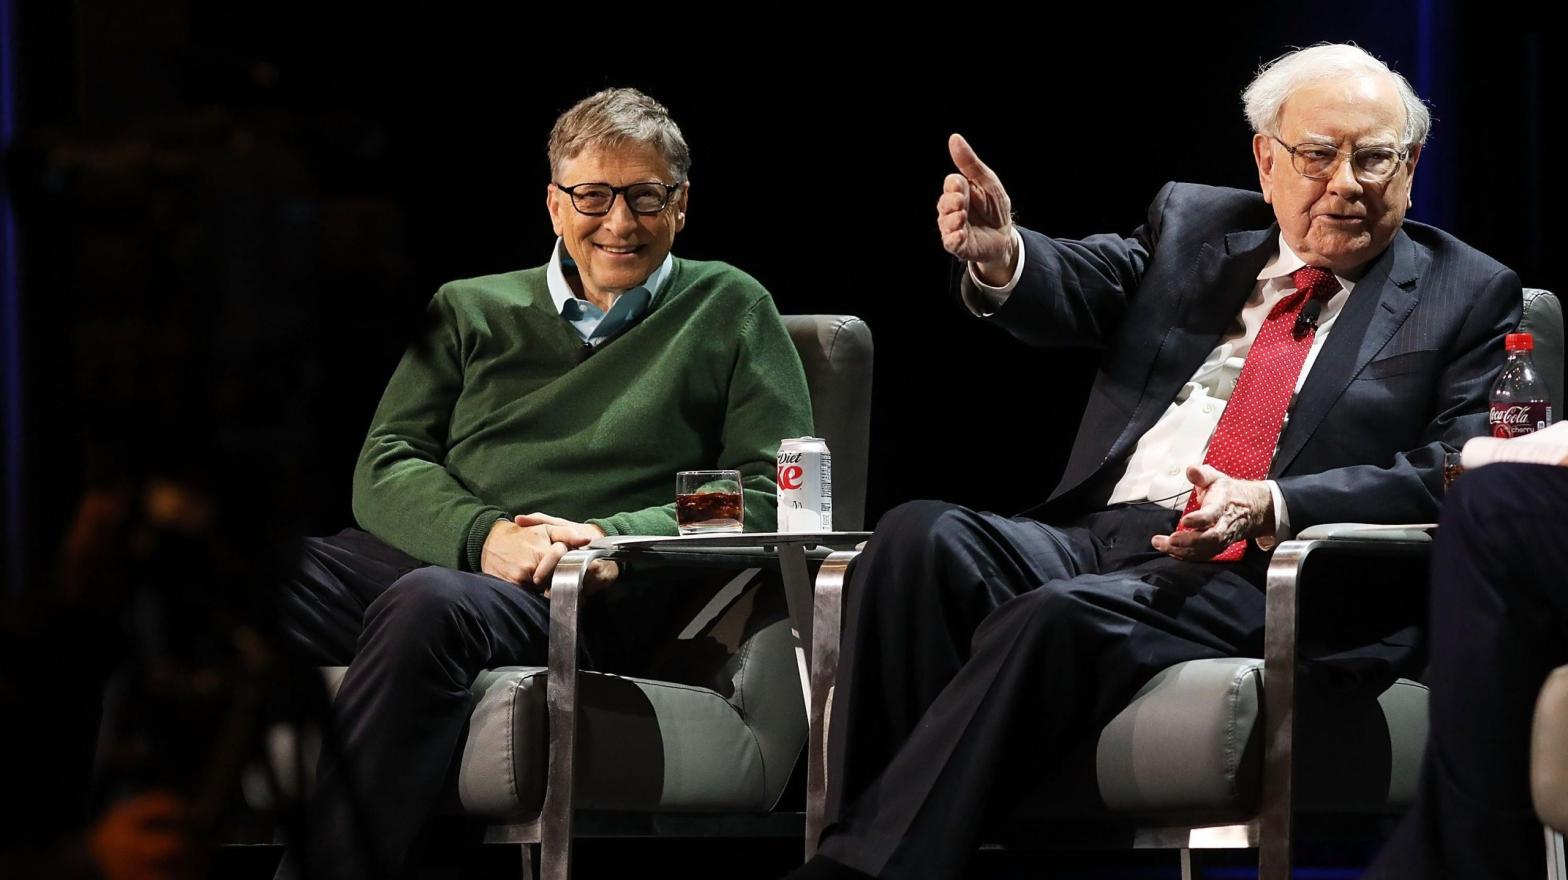 Bill Gates, left, and Warren Buffett, right, speaking with journalist Charlie Rose at a Columbia Business School event in January 2017. (Photo: Spencer Platt, Getty Images)